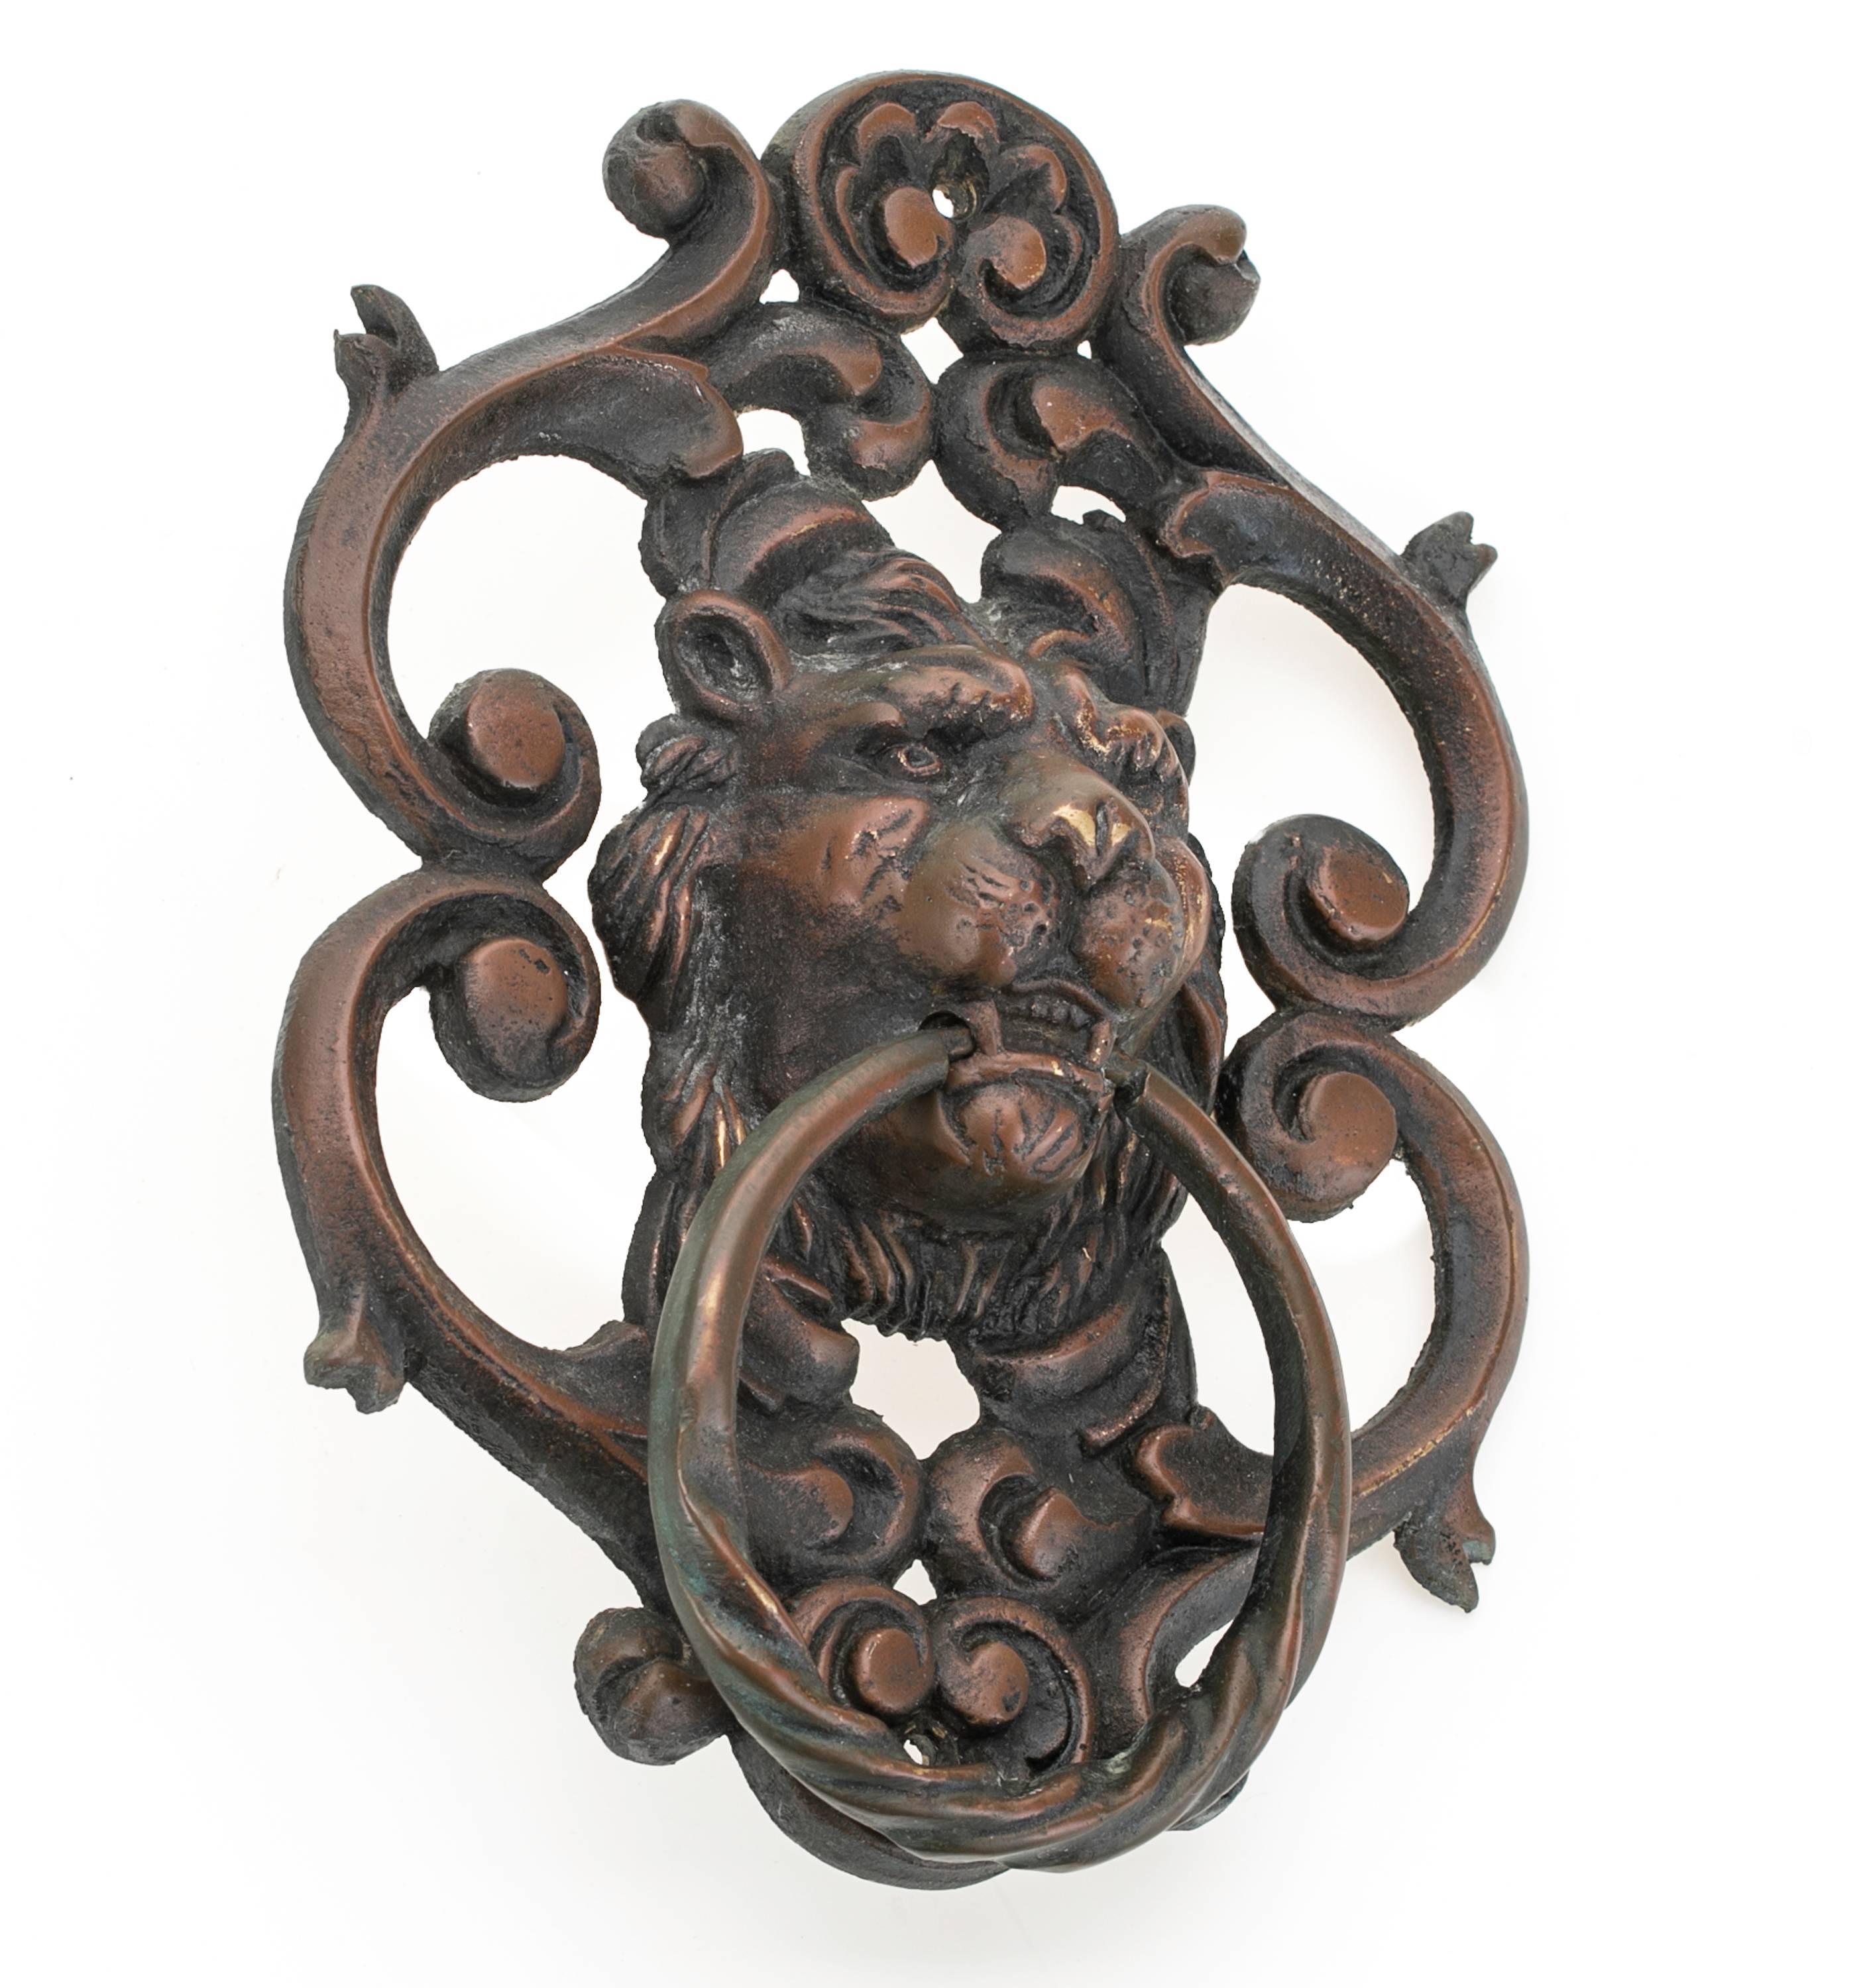 Cast bronze lion face door knocker, circa 1920s. Fierce looking lion head embellished in scrolled works, patinated bronze in copper finish.
A very handsome stately piece.